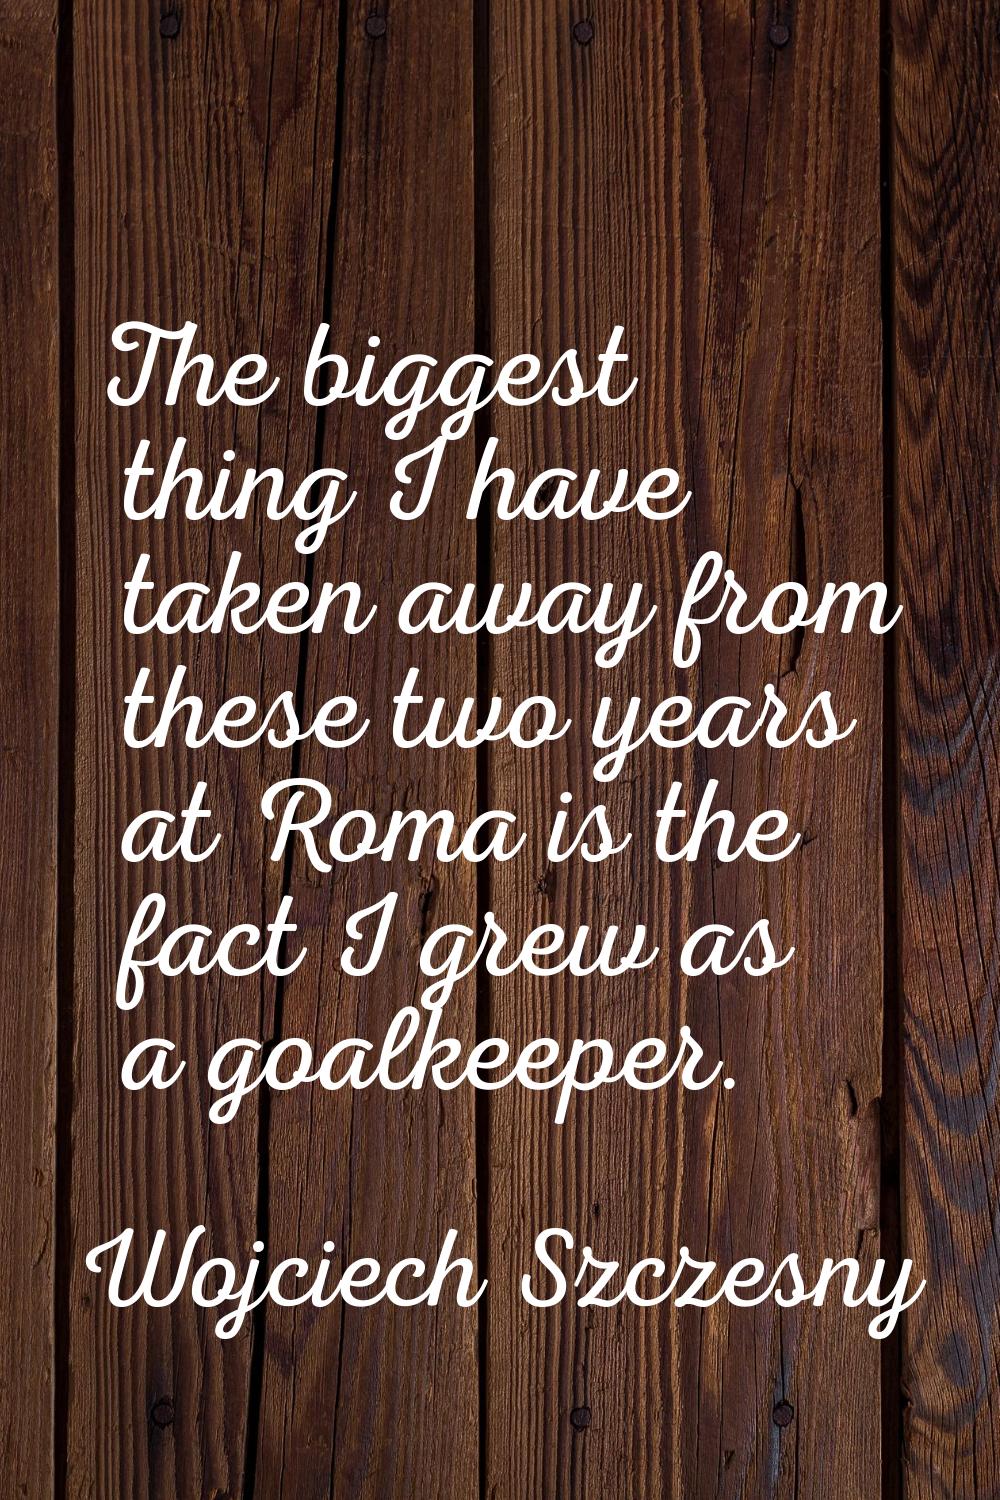 The biggest thing I have taken away from these two years at Roma is the fact I grew as a goalkeeper